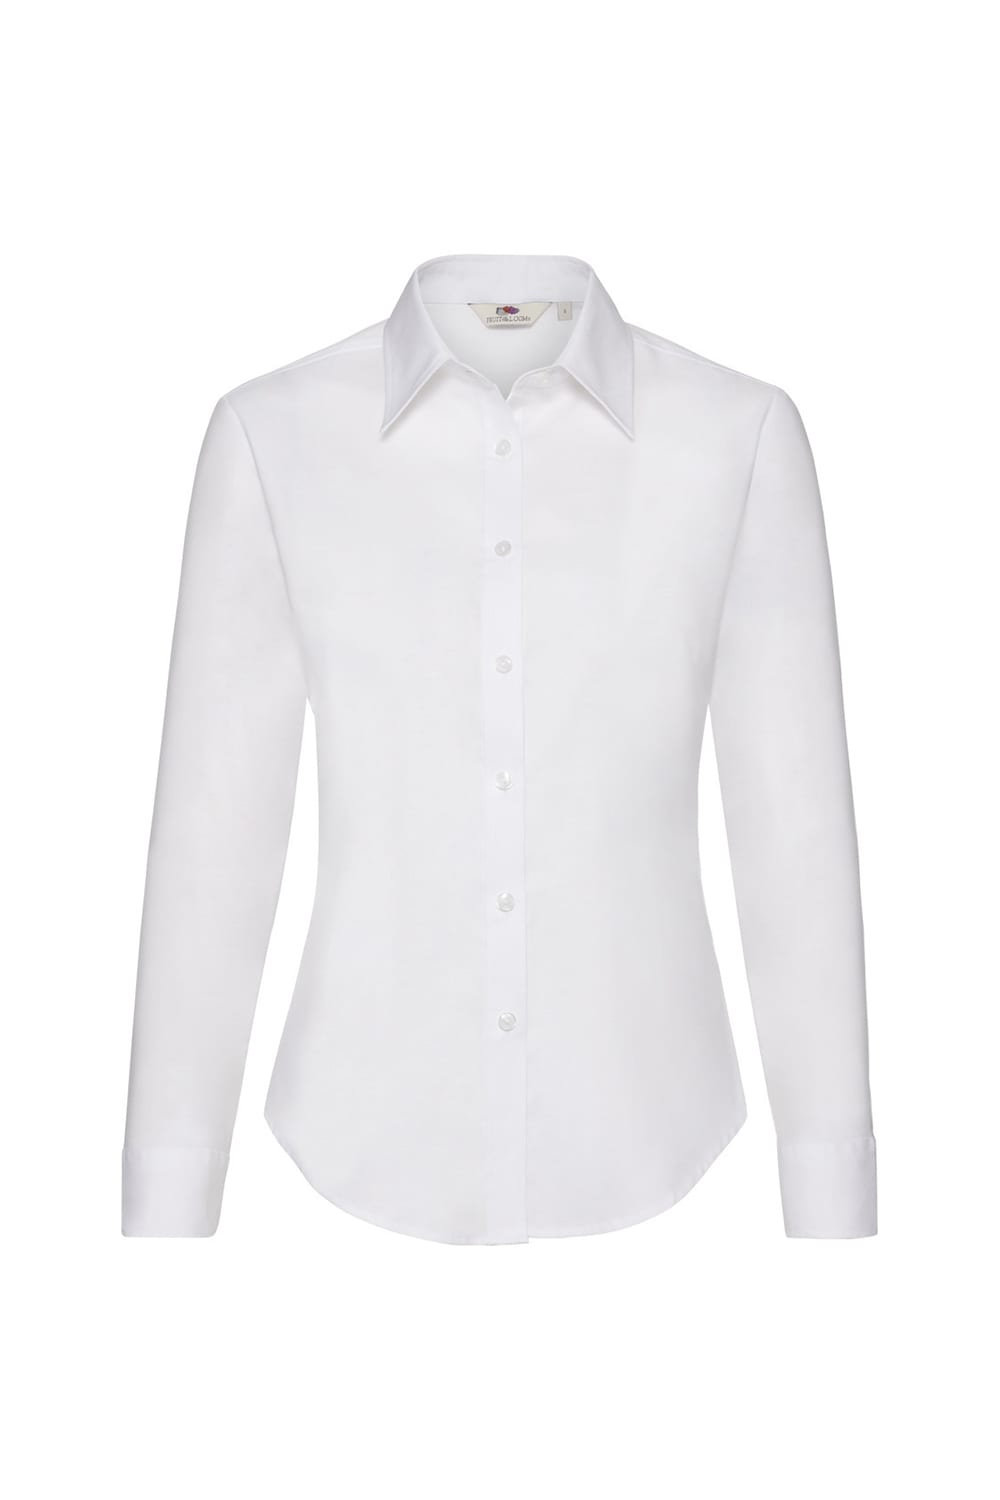 Fruit Of The Loom Ladies Lady-Fit Long Sleeve Oxford Shirt (White)